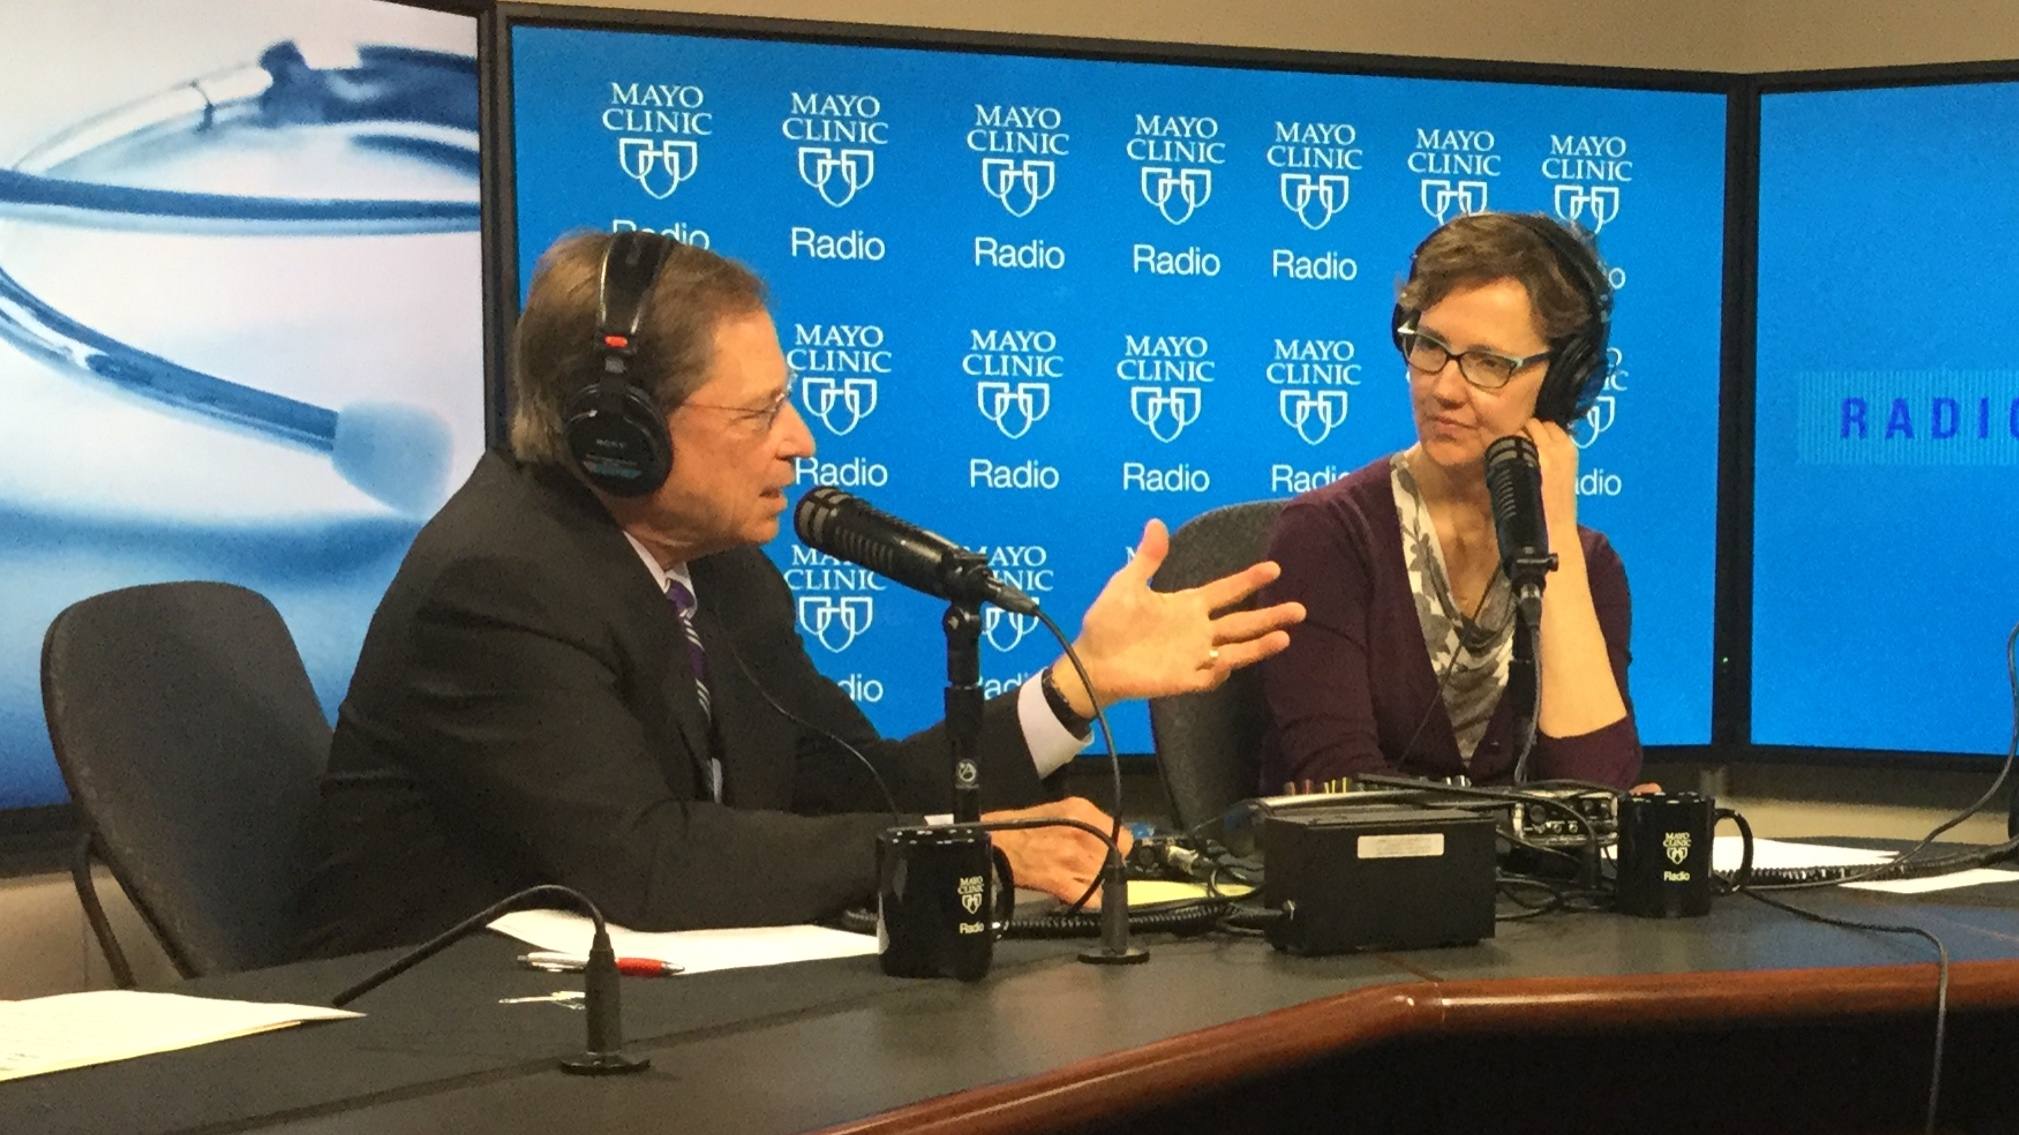 Dr. Tom Shives and Tracy McCray on the Mayo Clinic Radio set